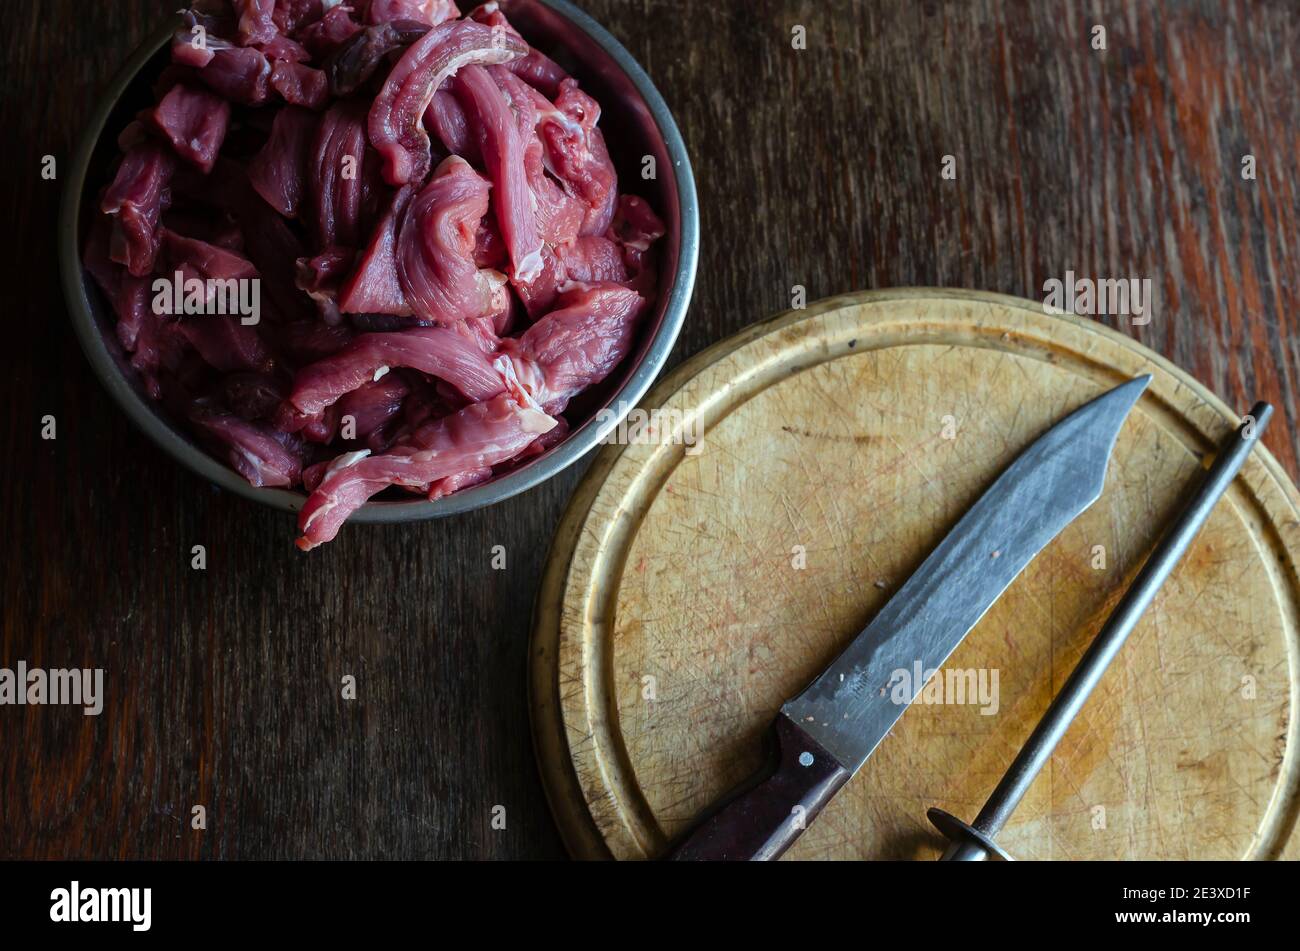 https://c8.alamy.com/comp/2E3XD1F/cooking-beef-meat-dishes-a-portion-of-raw-meat-for-beef-stroganoff-in-a-metal-bowl-cutting-board-knife-mussat-2E3XD1F.jpg